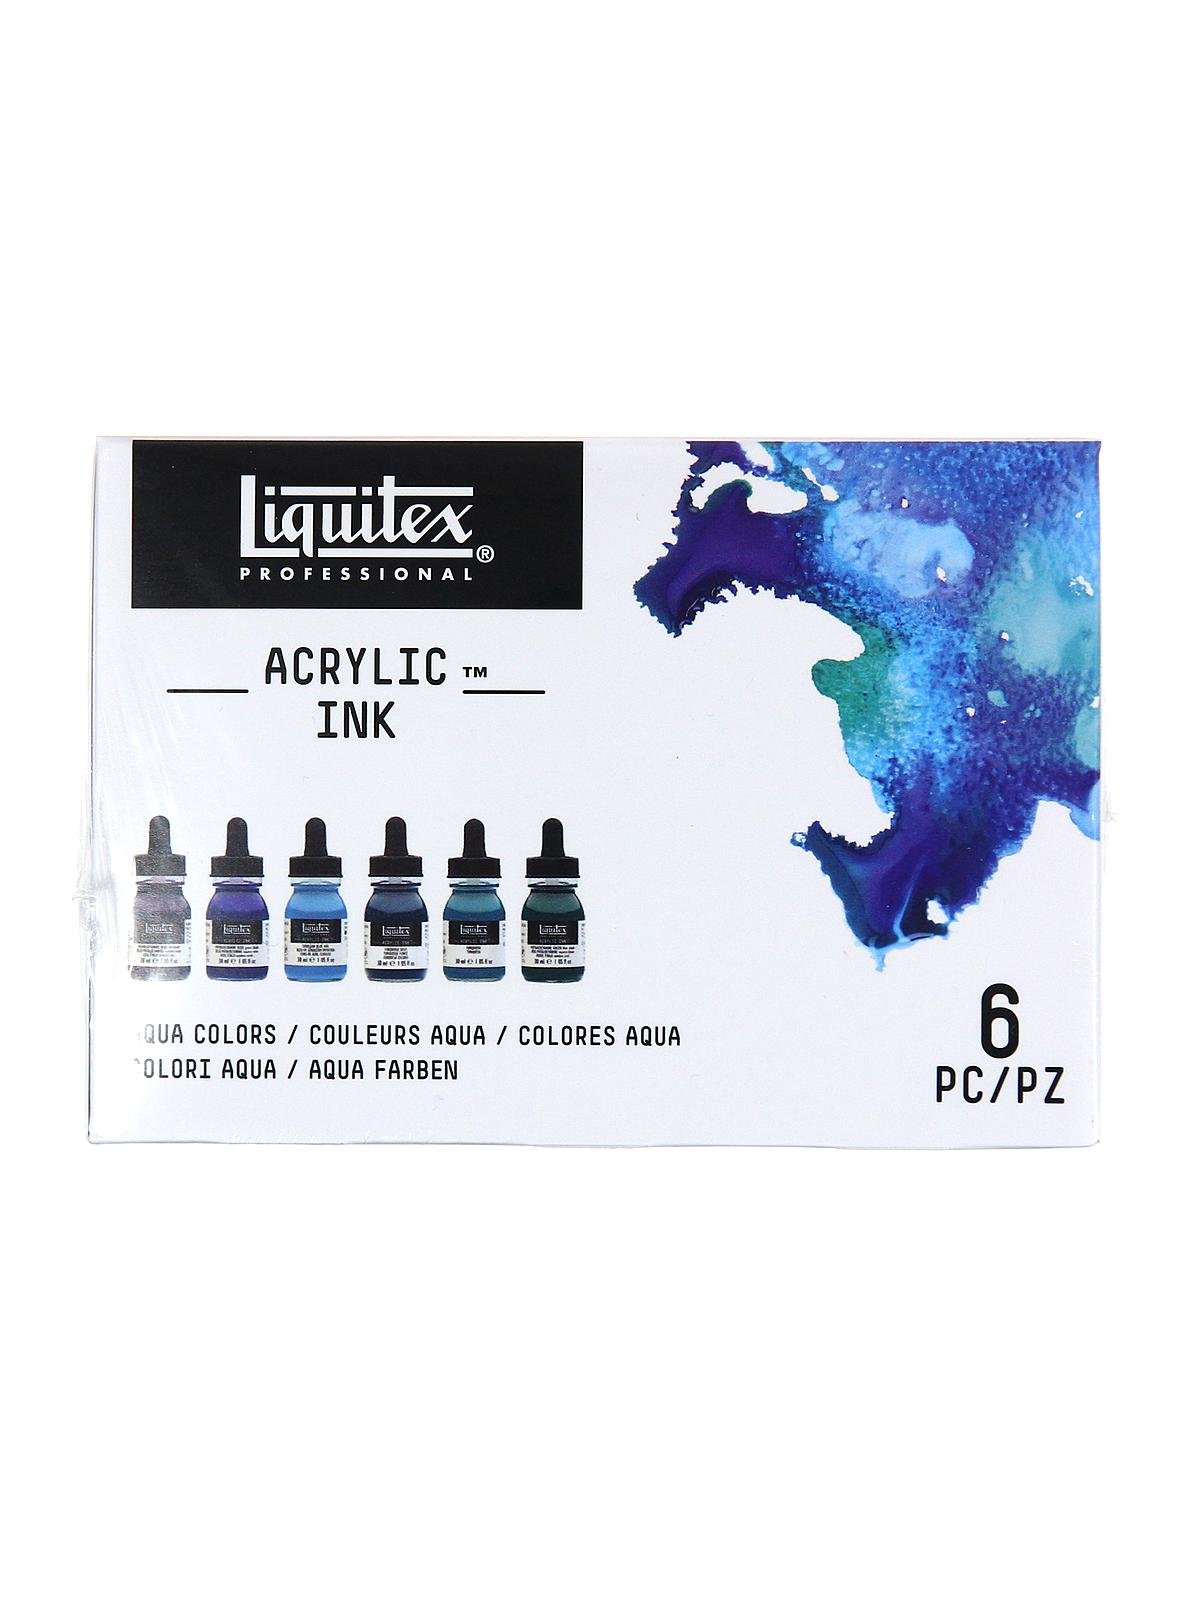 How To use Liquitex Professional Acrylic Inks for Wet in Wet